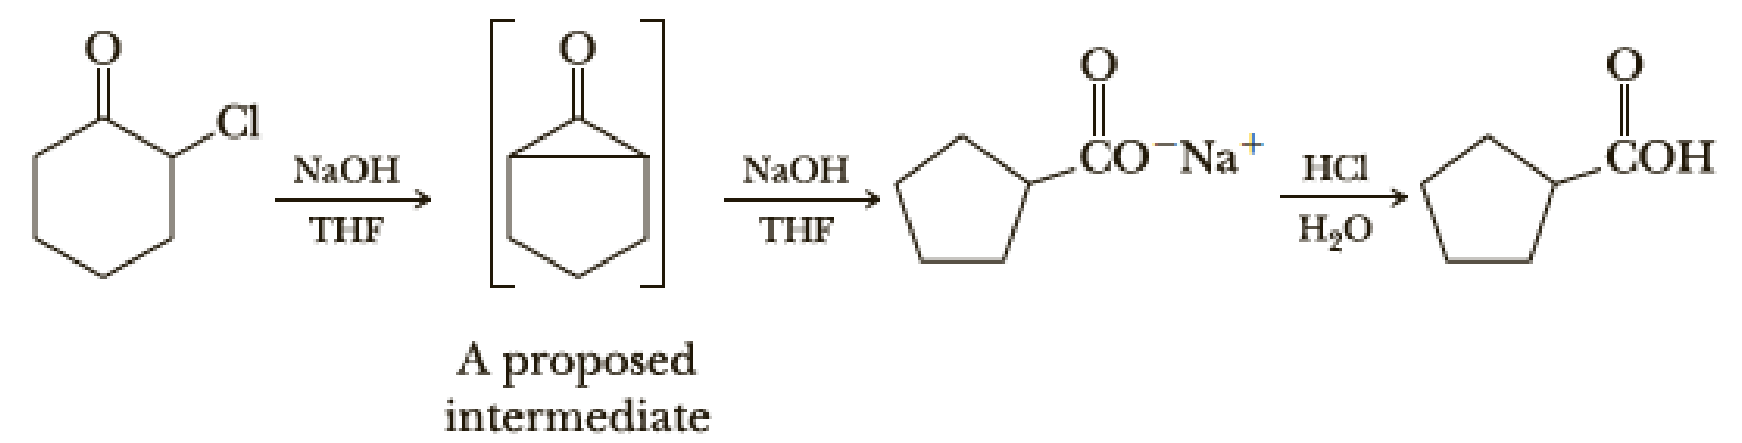 Chapter 16, Problem 16.47P, The base-promoted rearrangement of an -haloketone to a carboxylic acid, known as the Favorskii 